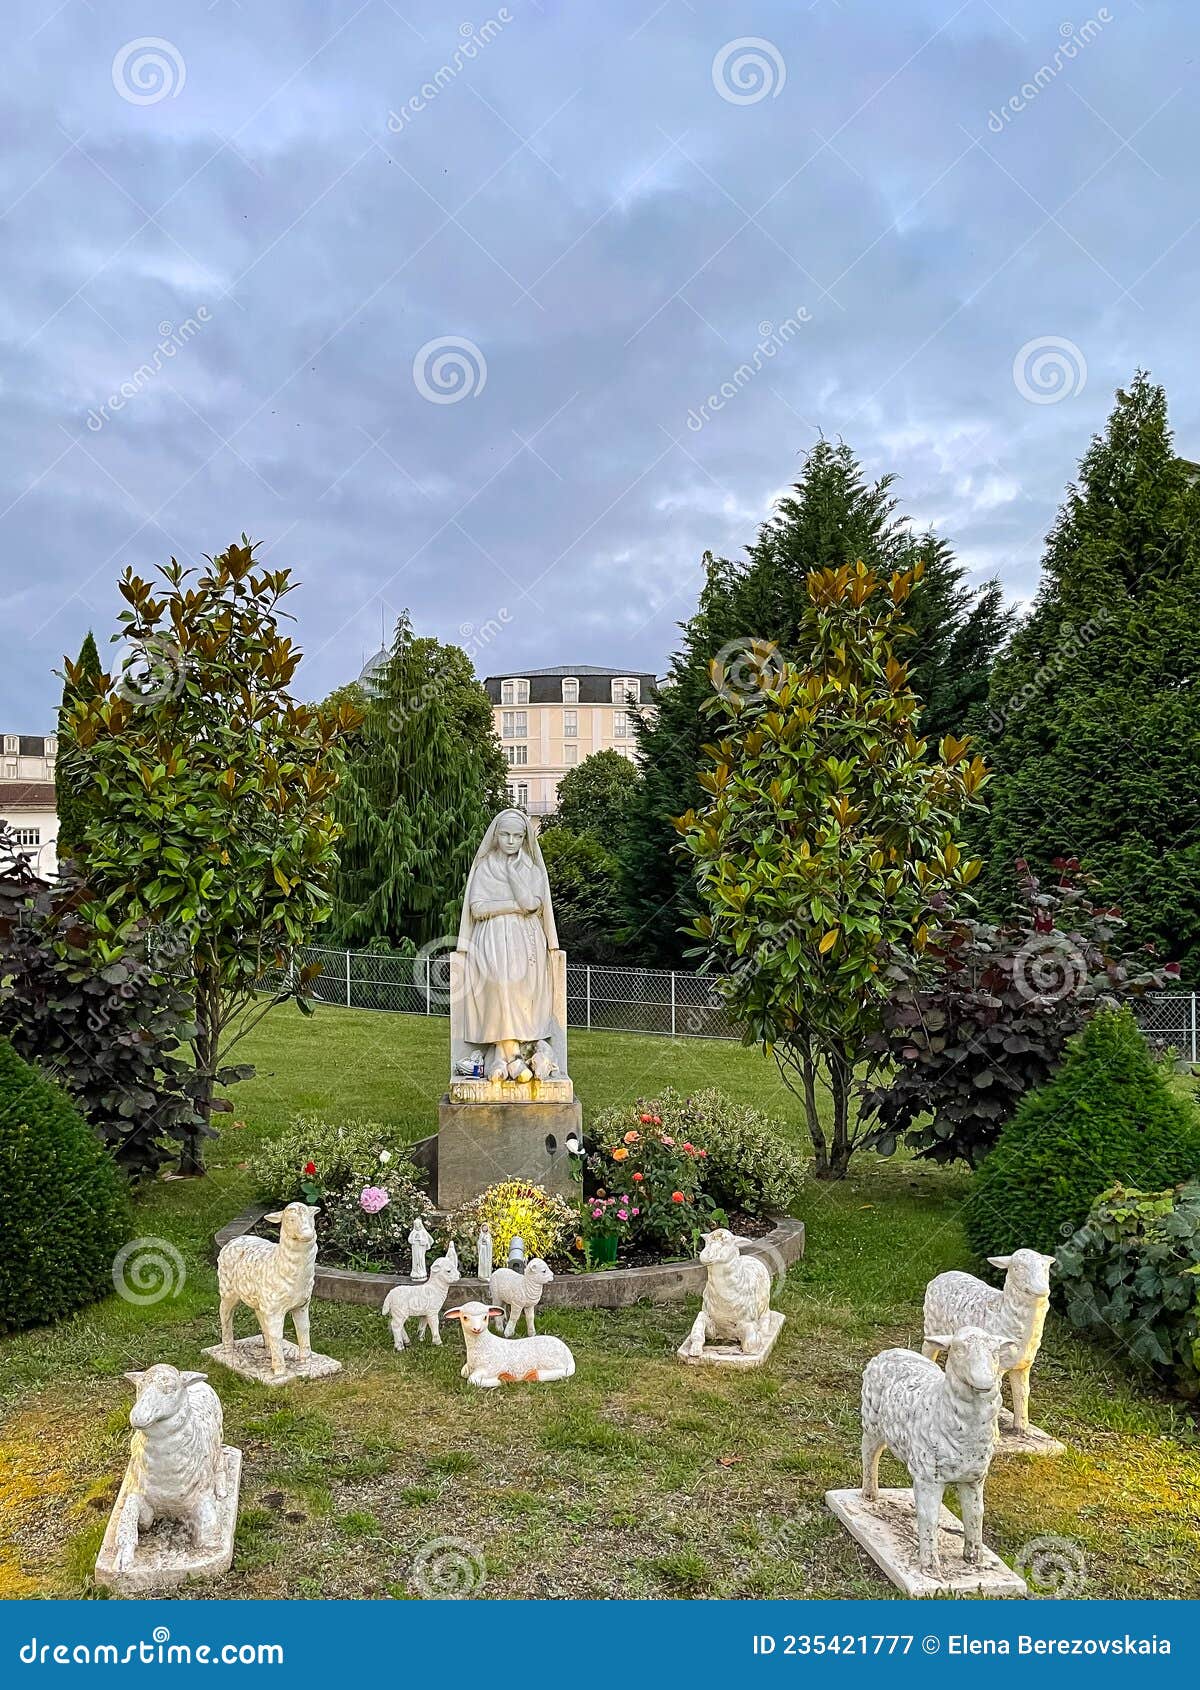 Sculpture of the Virgin Mary and Lambs in Lourdes Editorial Photography ...